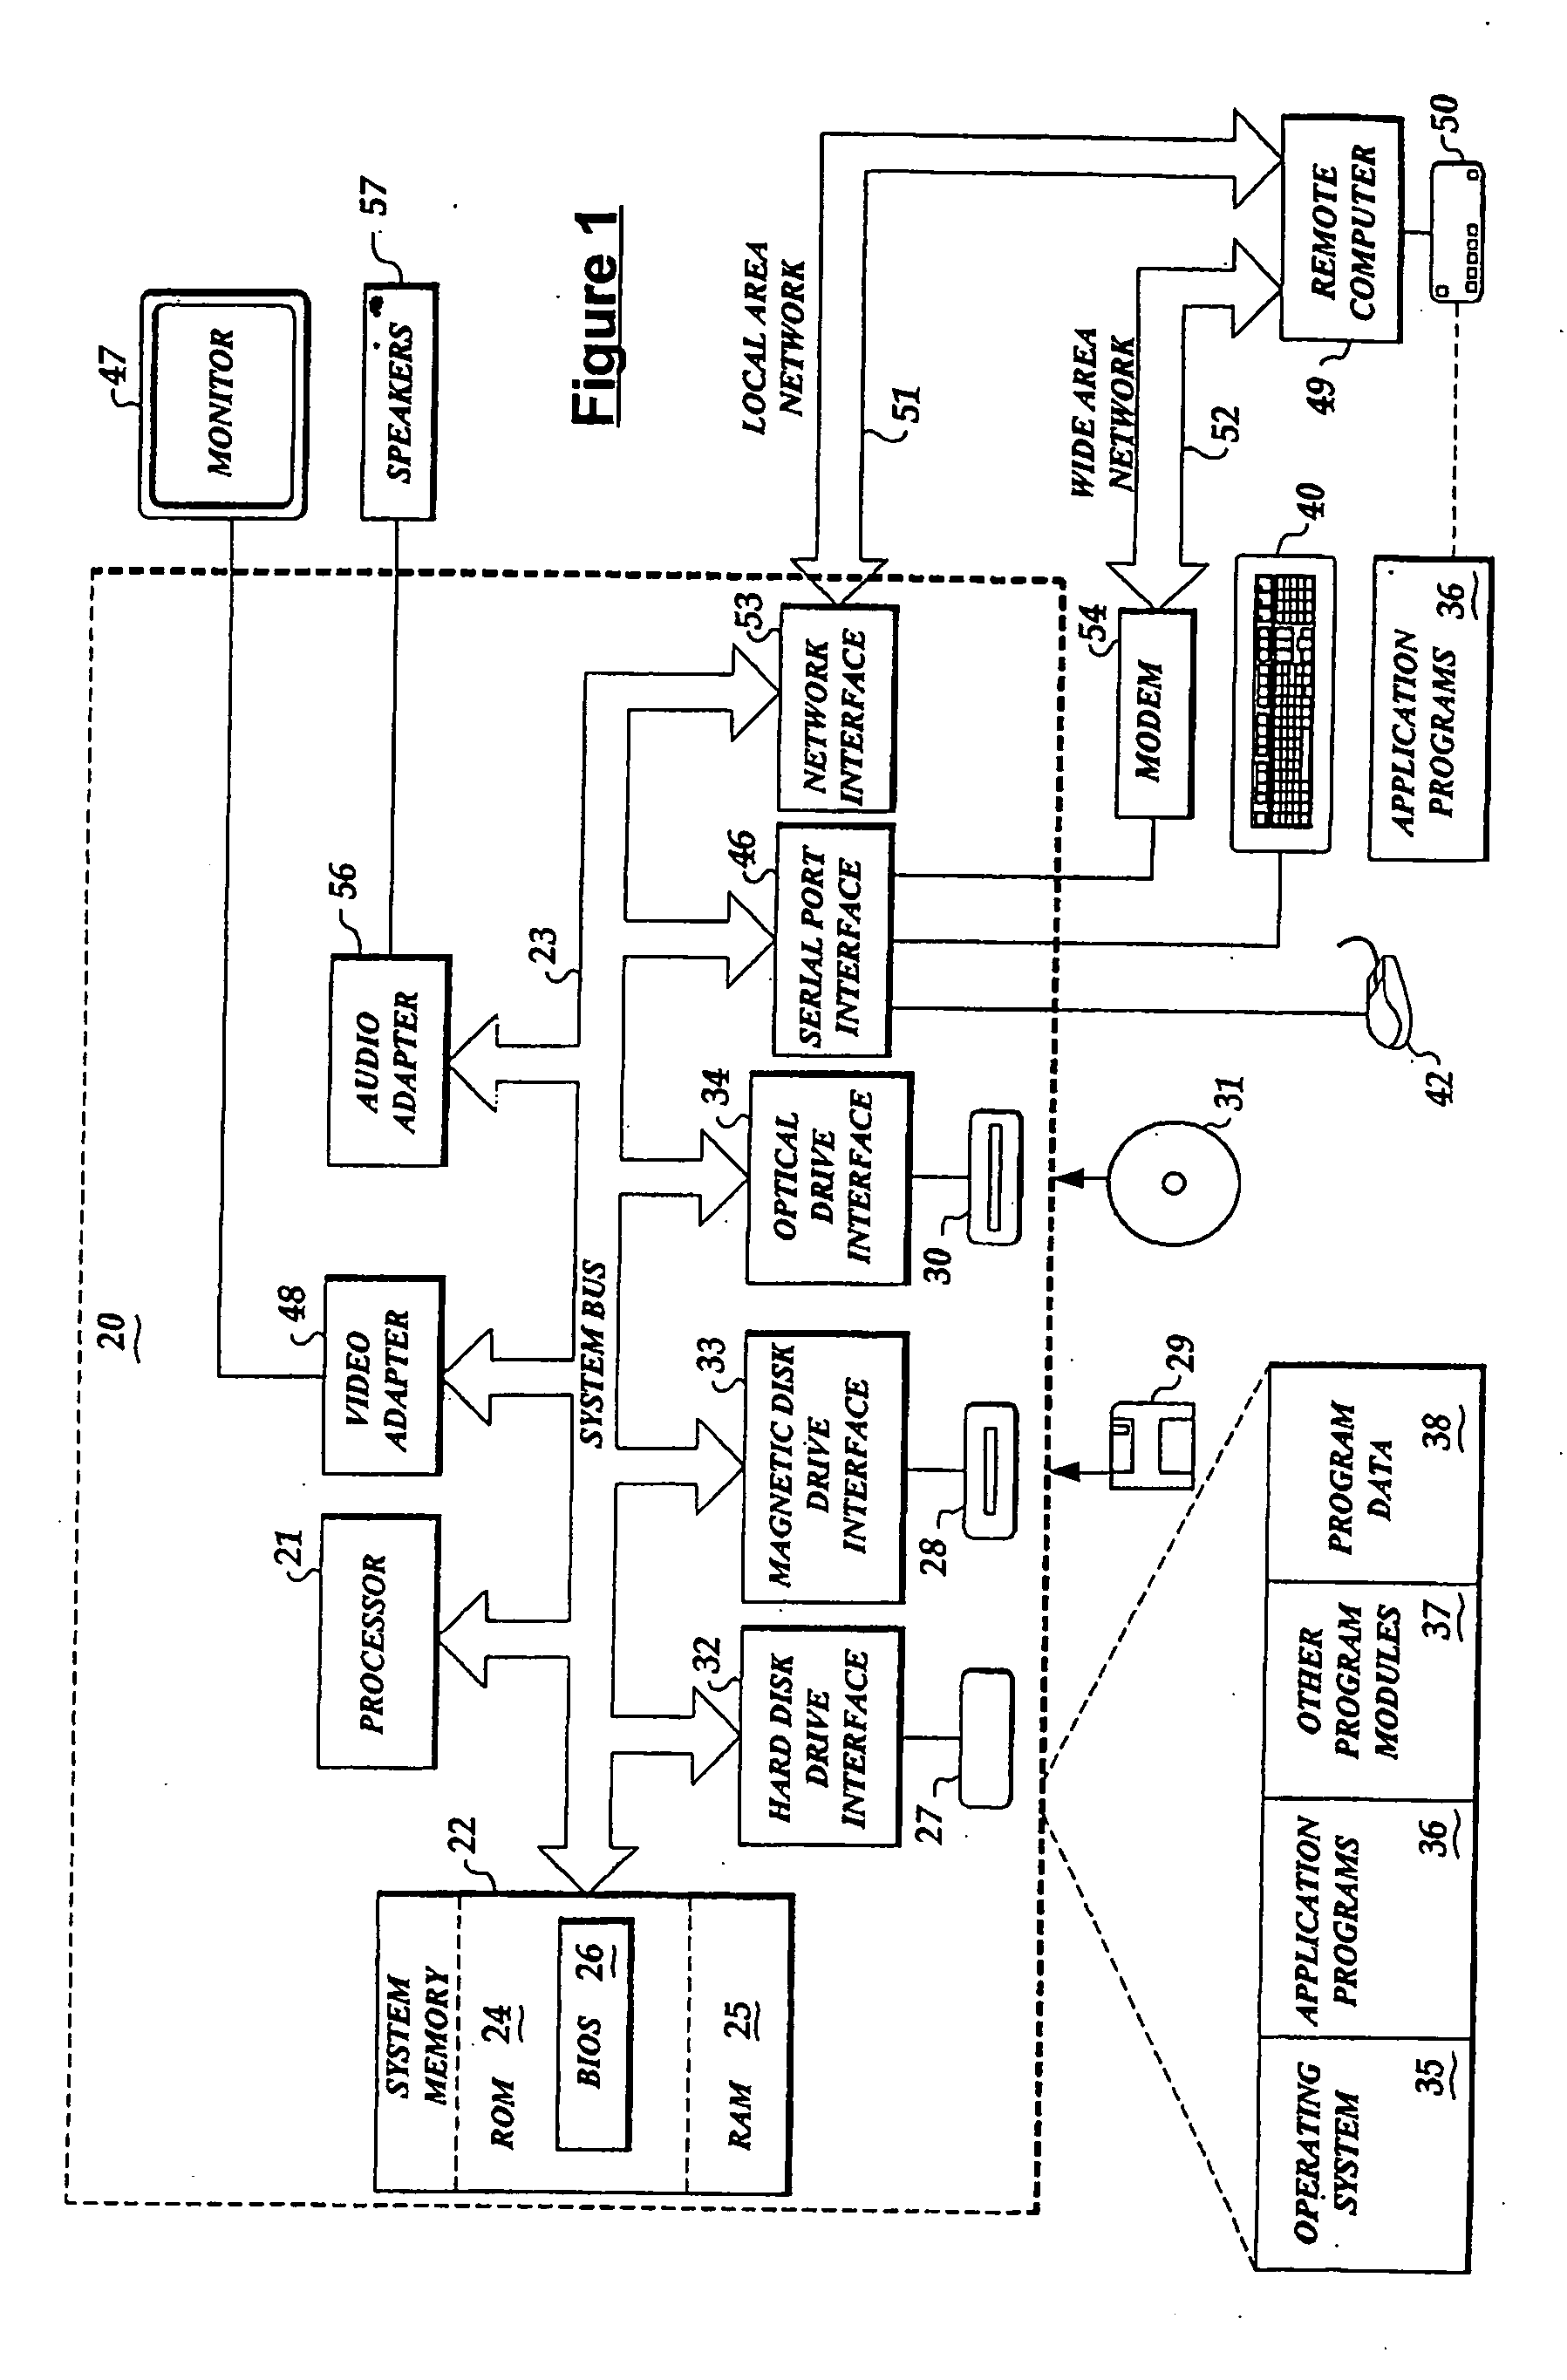 Method and system for real time scheduler